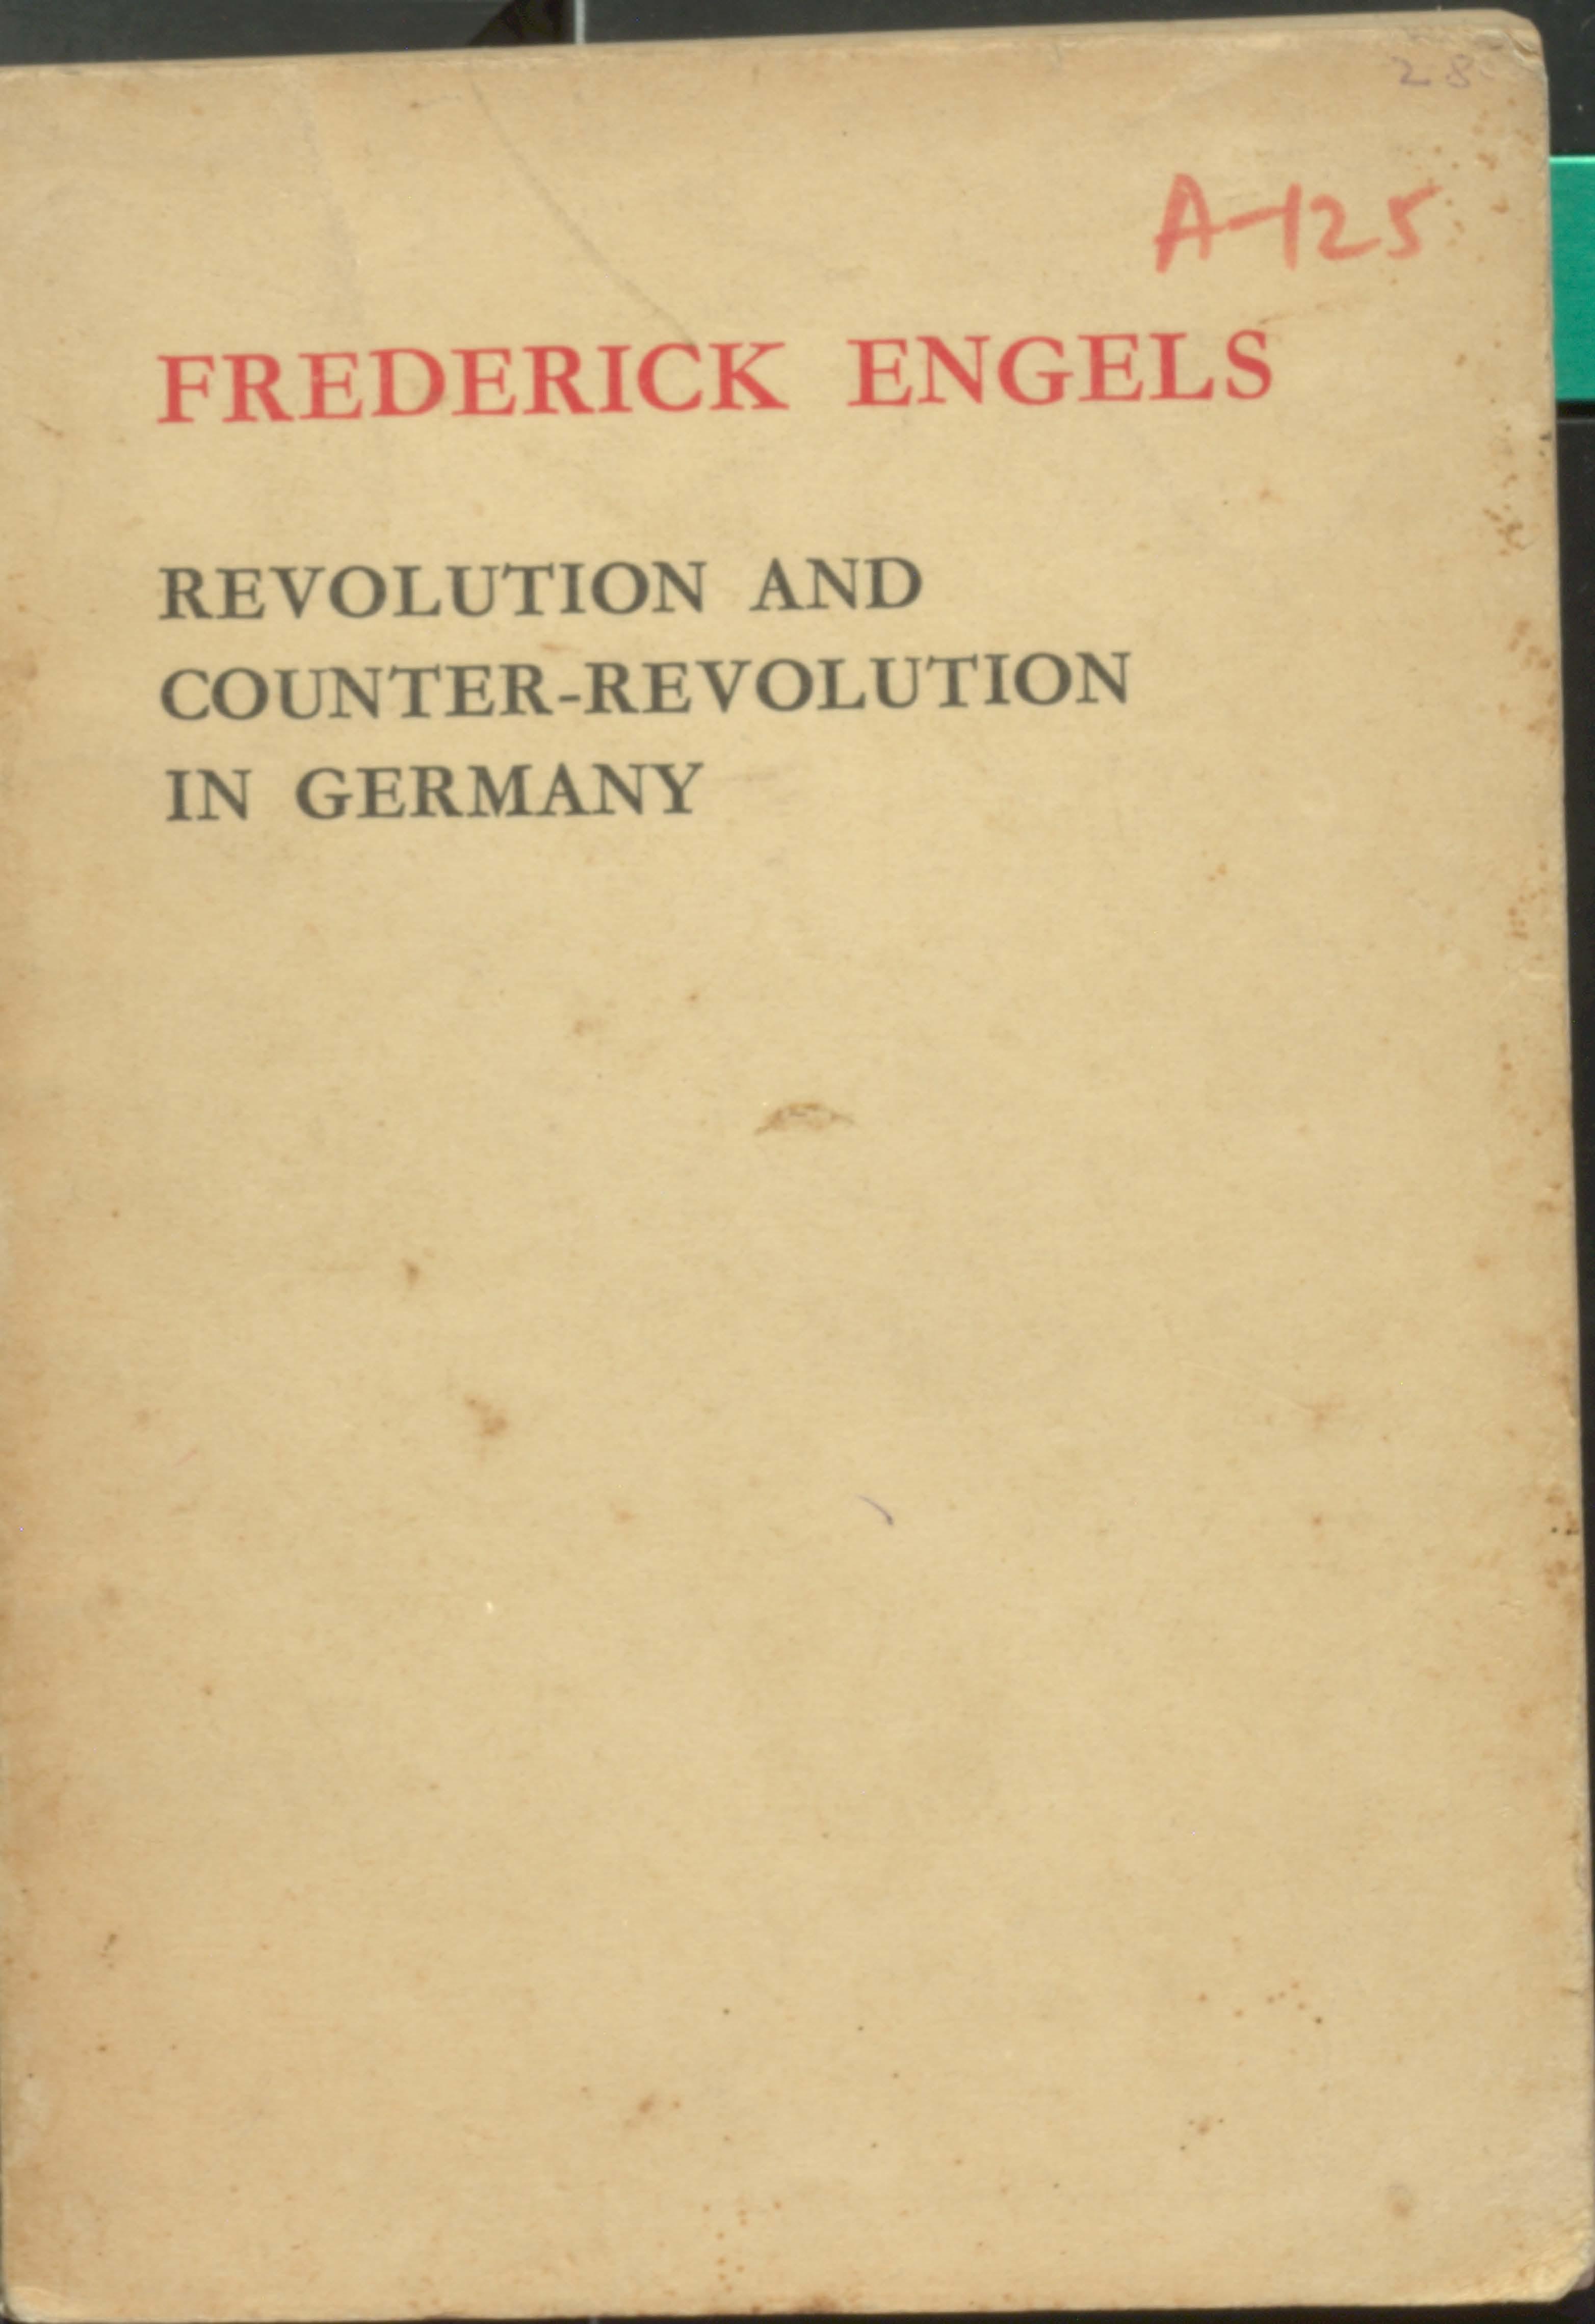 FREDERICK ENGELS REVOLOTION AND COUNTER-REVOLUTION IN GERMANY